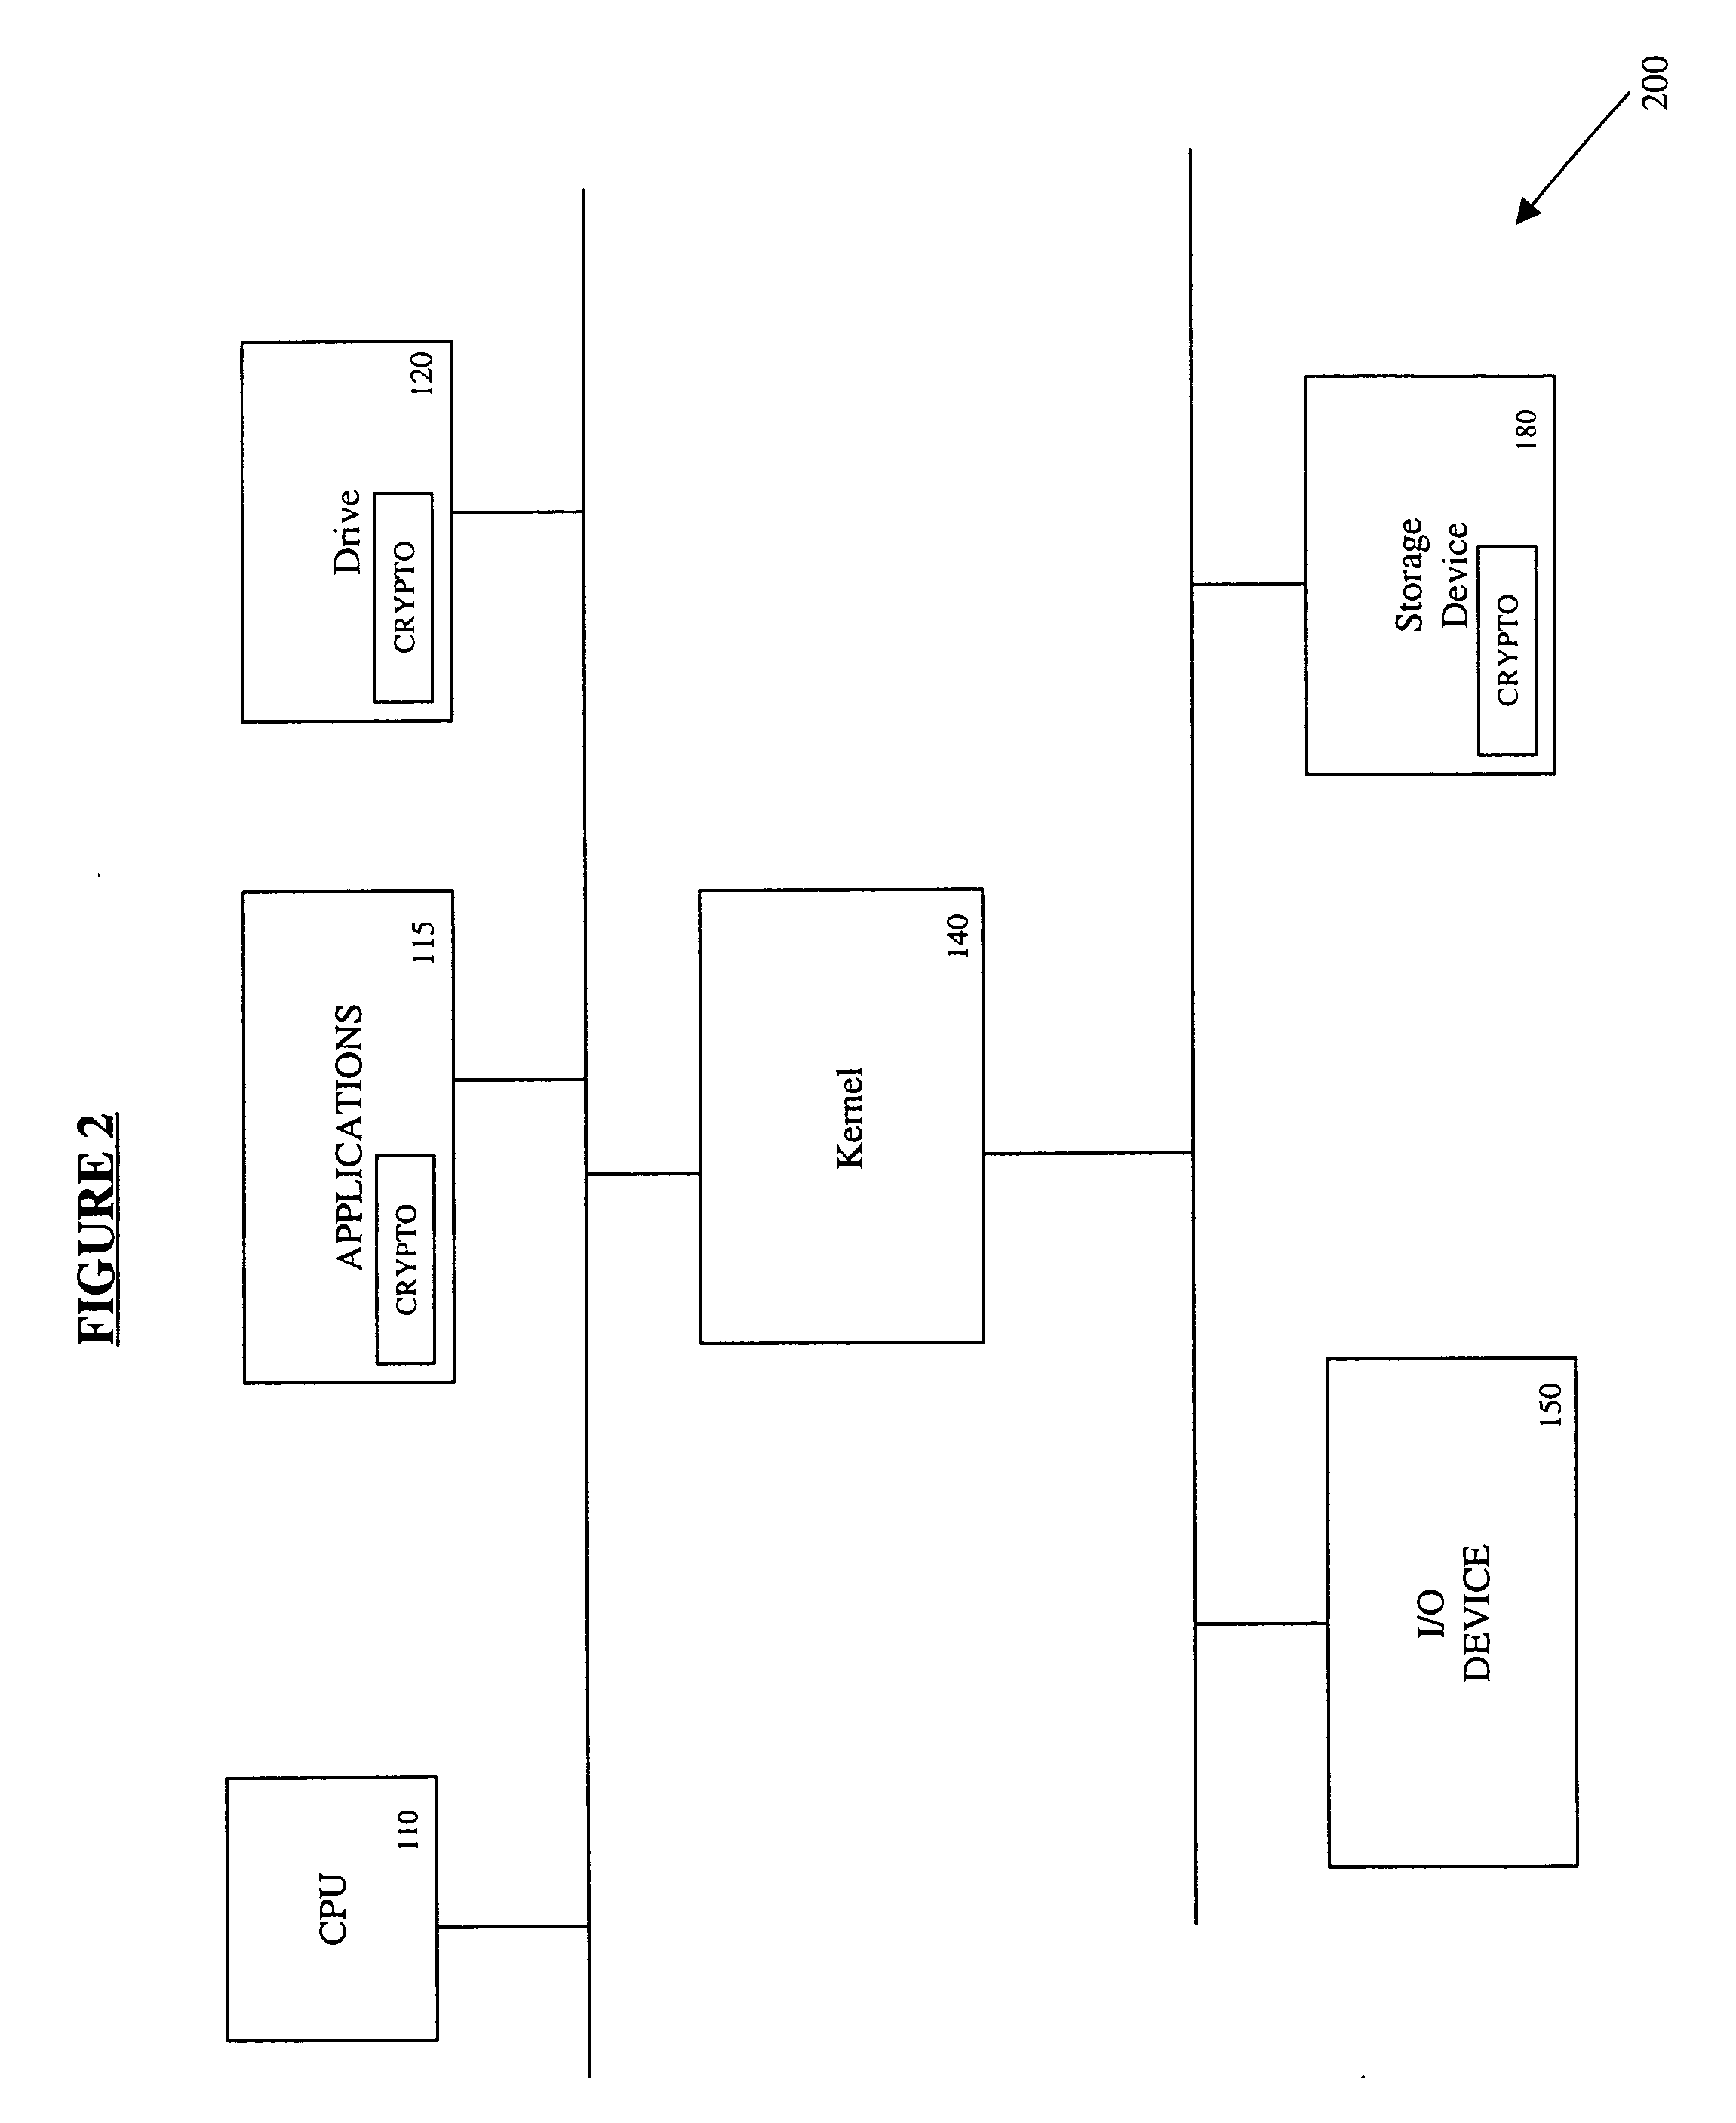 Kernel cryptographic module signature verification system and method